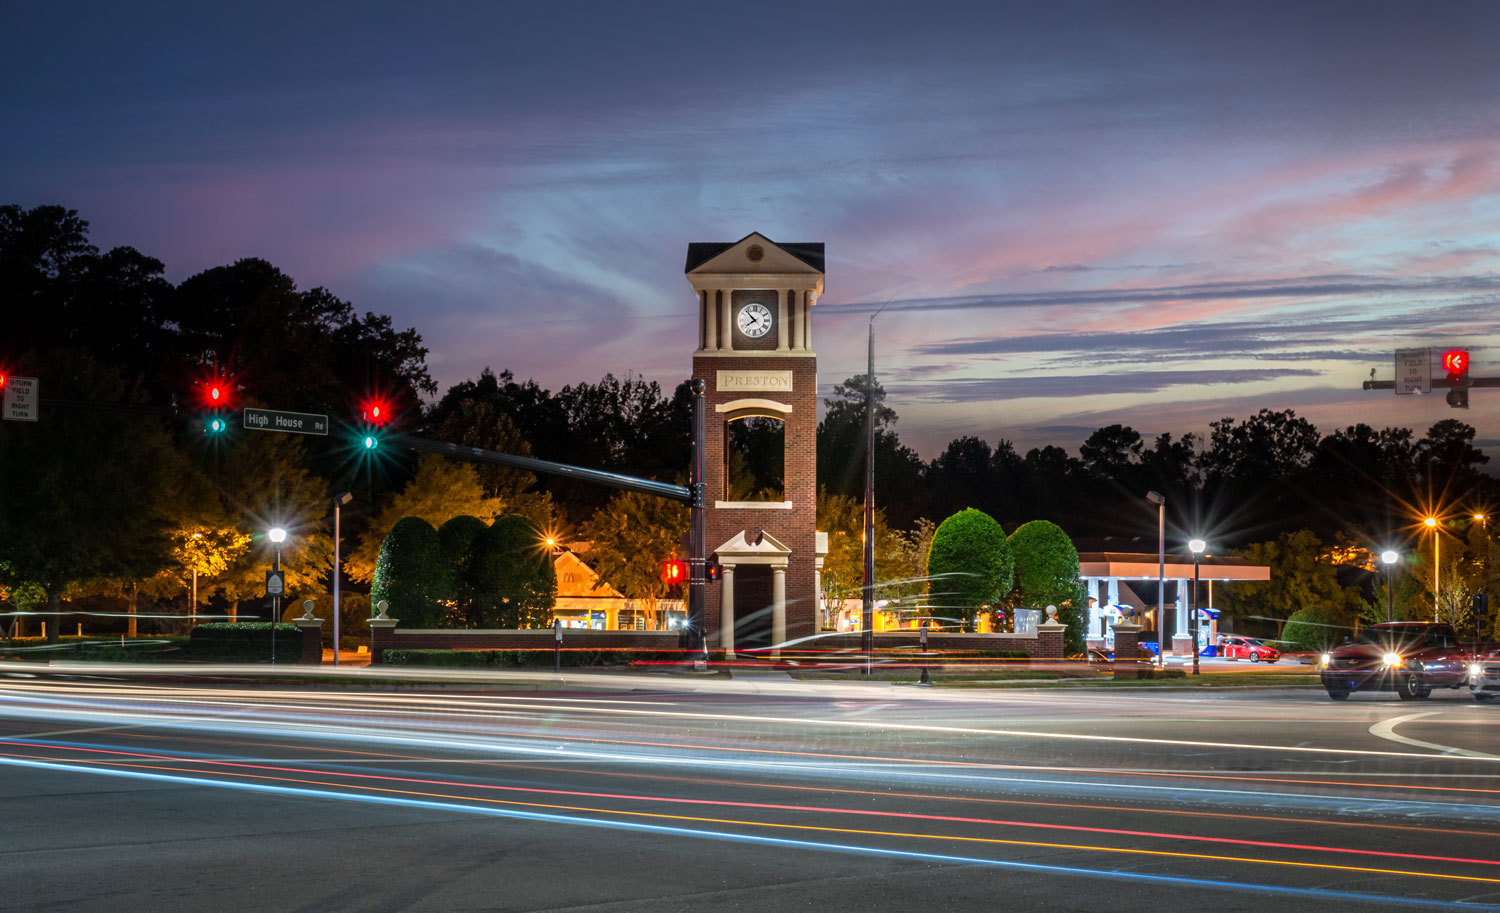 What You Need to Know About Moving to Cary, North Carolina